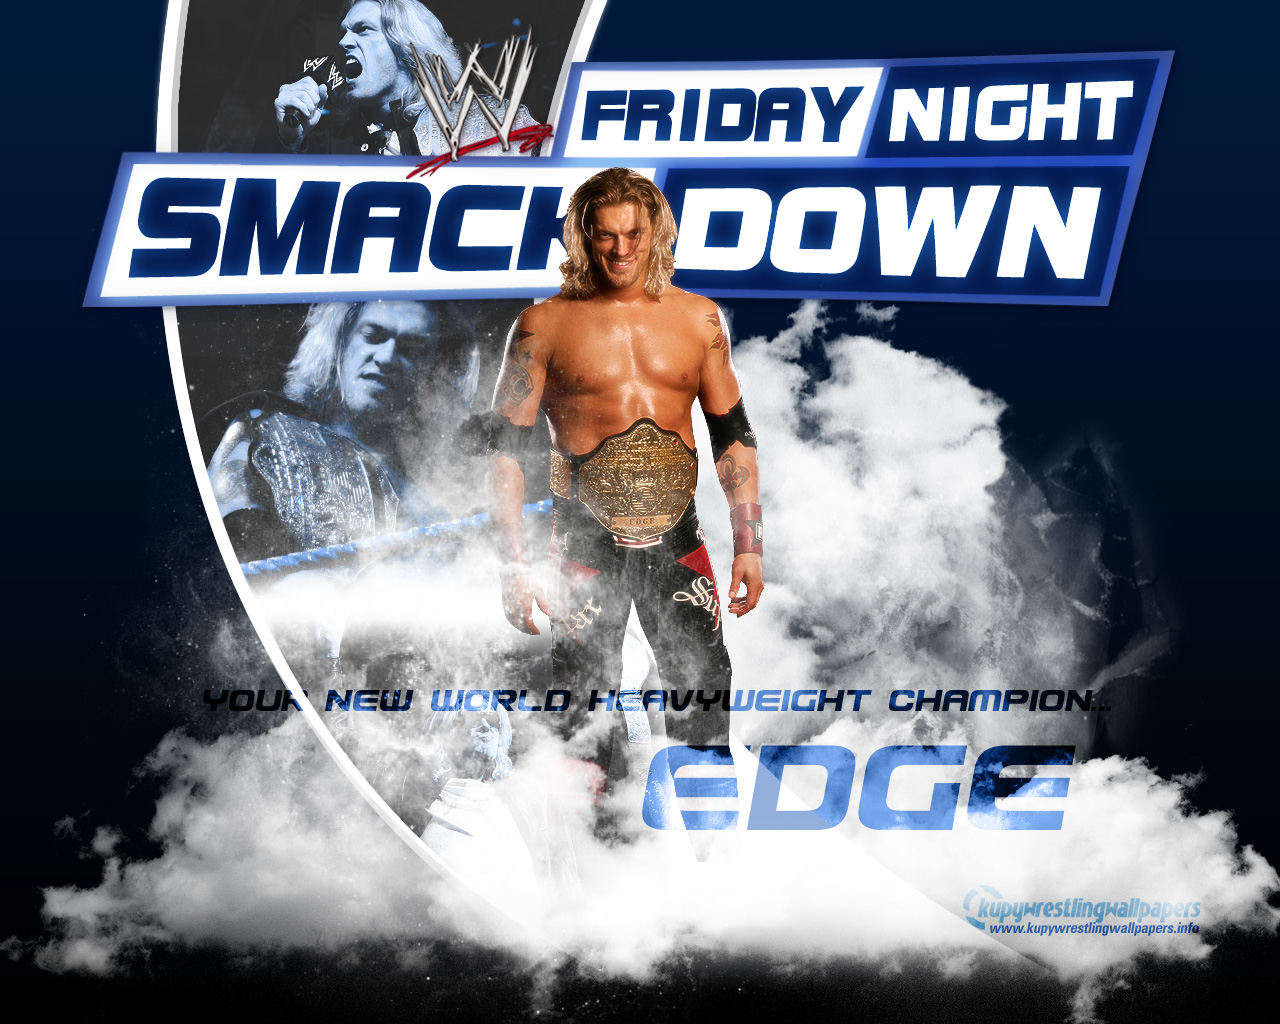 Free download smackdown wallpaper 1280x1024 for your Desktop, Mobile and Tablet Explore 76+ Smackdown Wallpapers Smackdown Wallpaper, Wwe Smackdown Wallpapers, Smackdown vs Raw Wallpaper